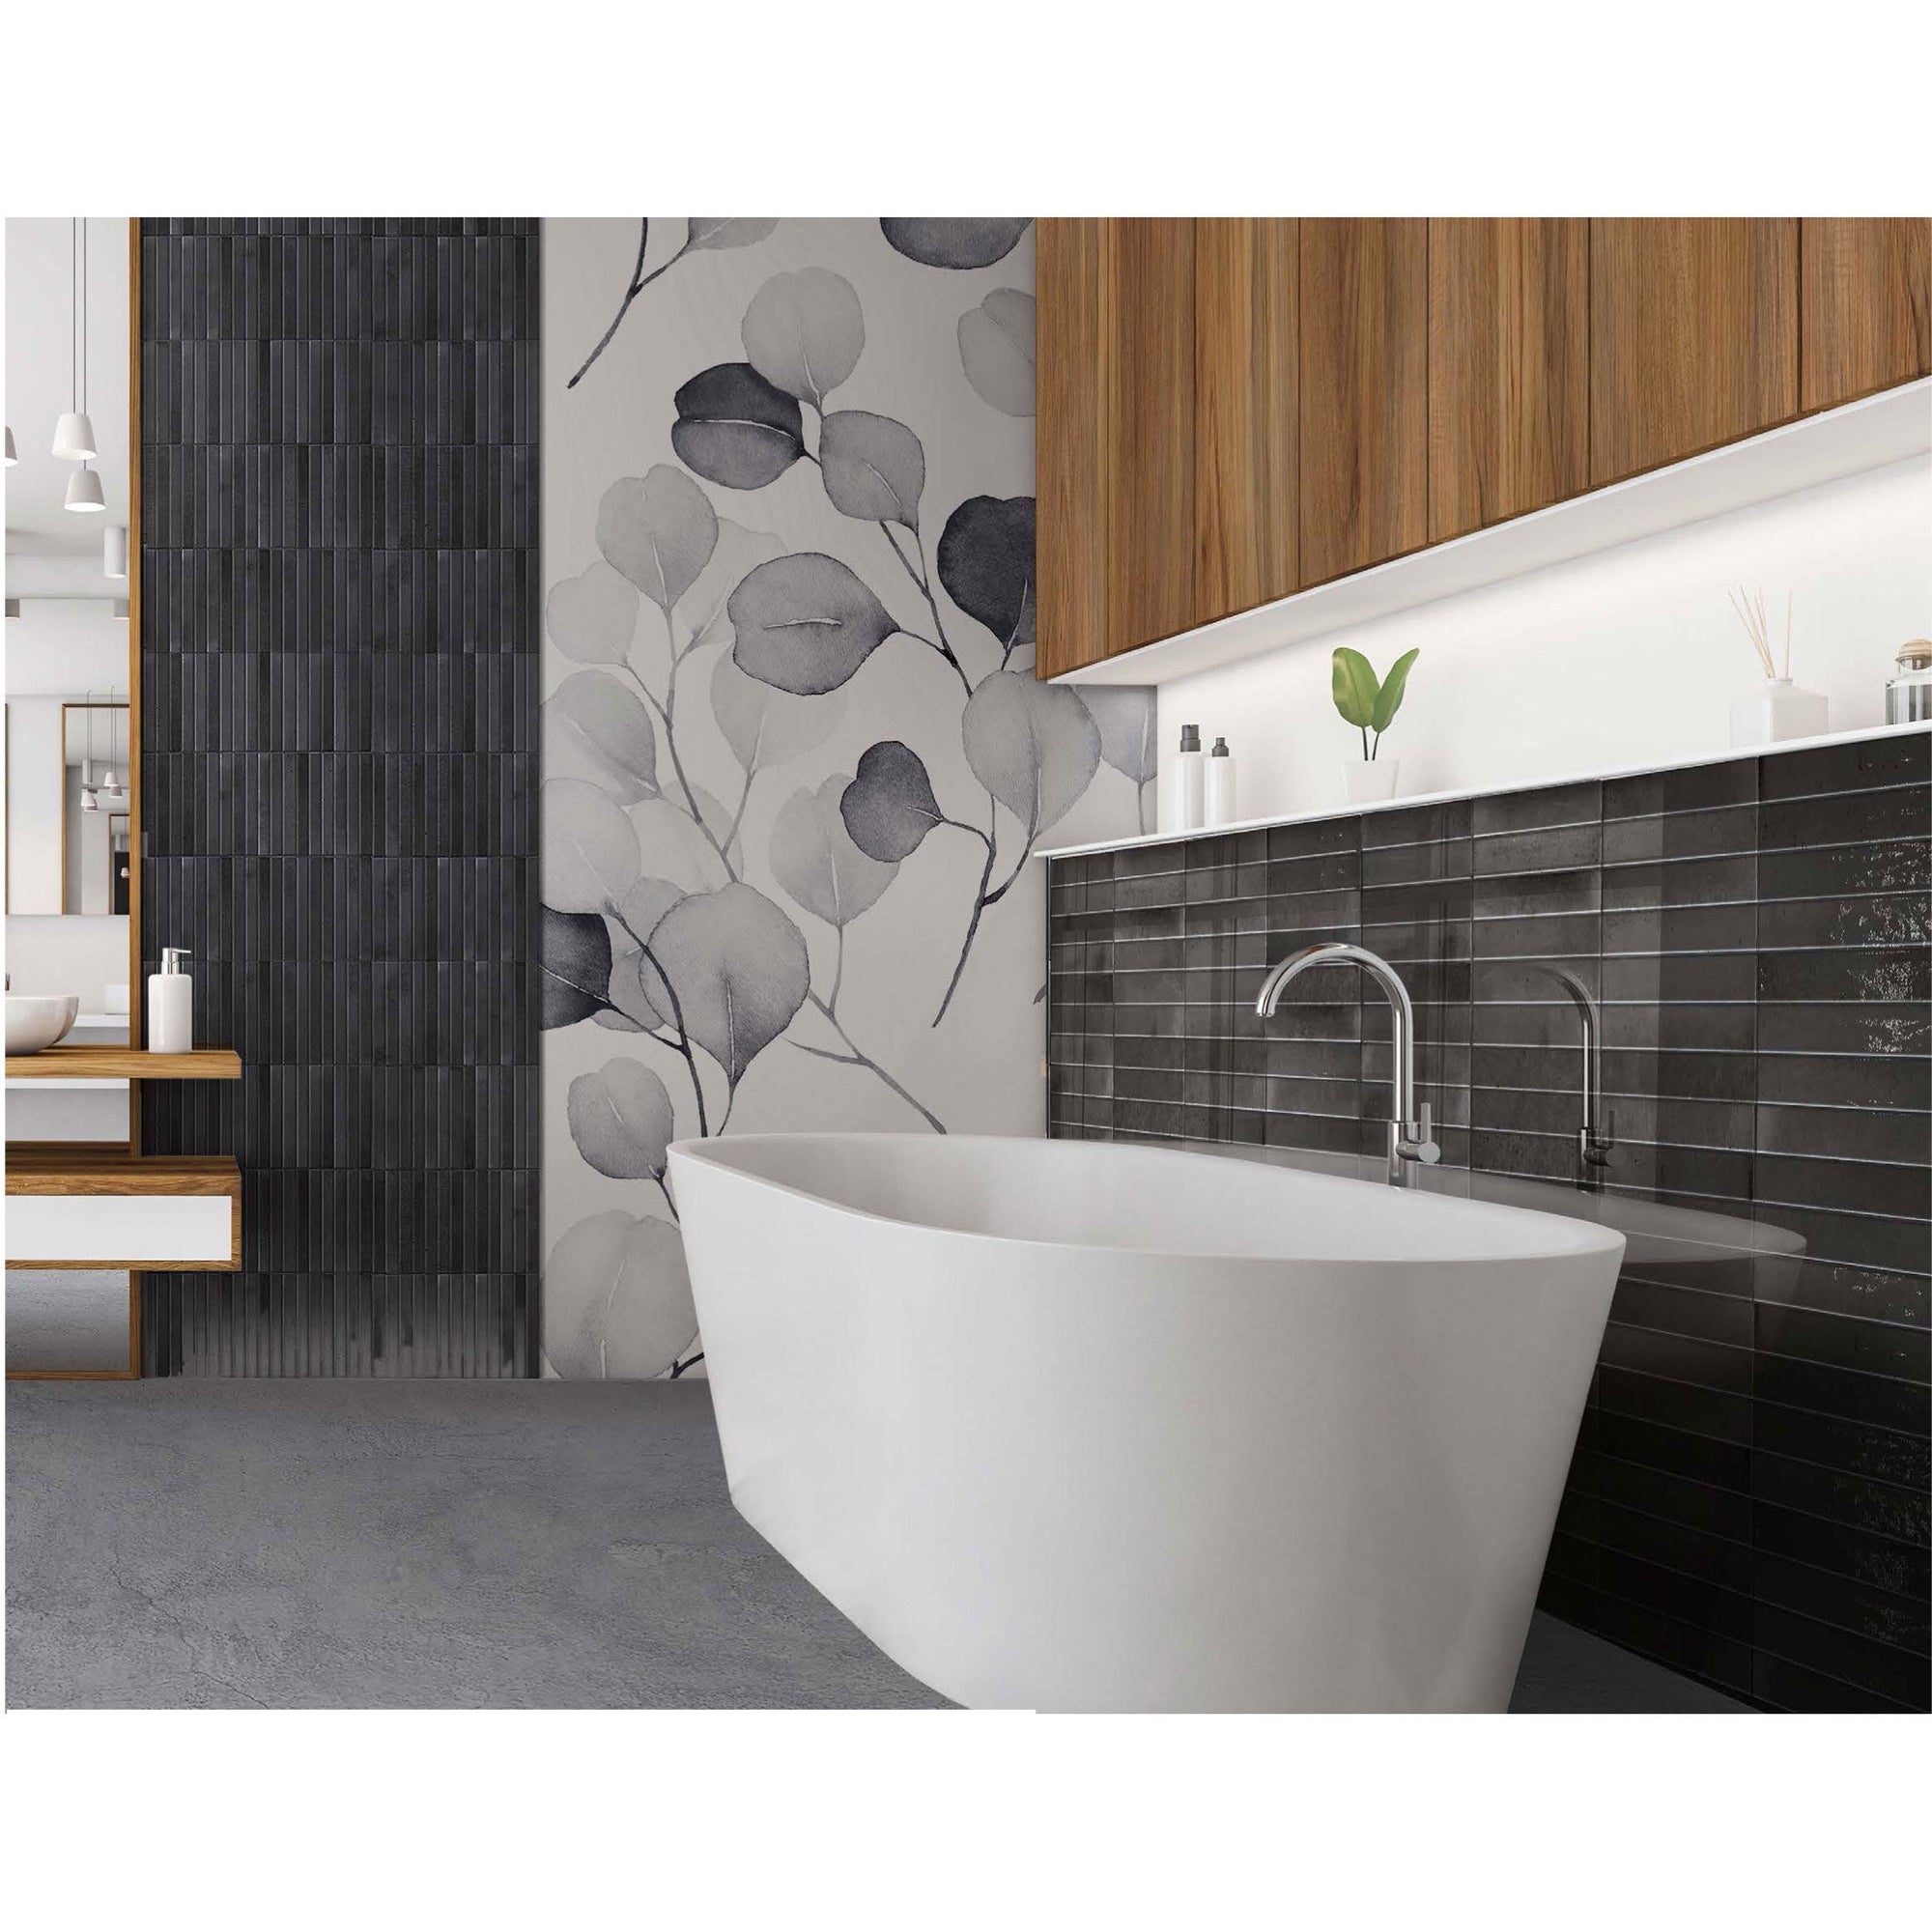 Cobsa - Homey Series 3 in. x 10 in. Porcelain Subway Tile - Licorice